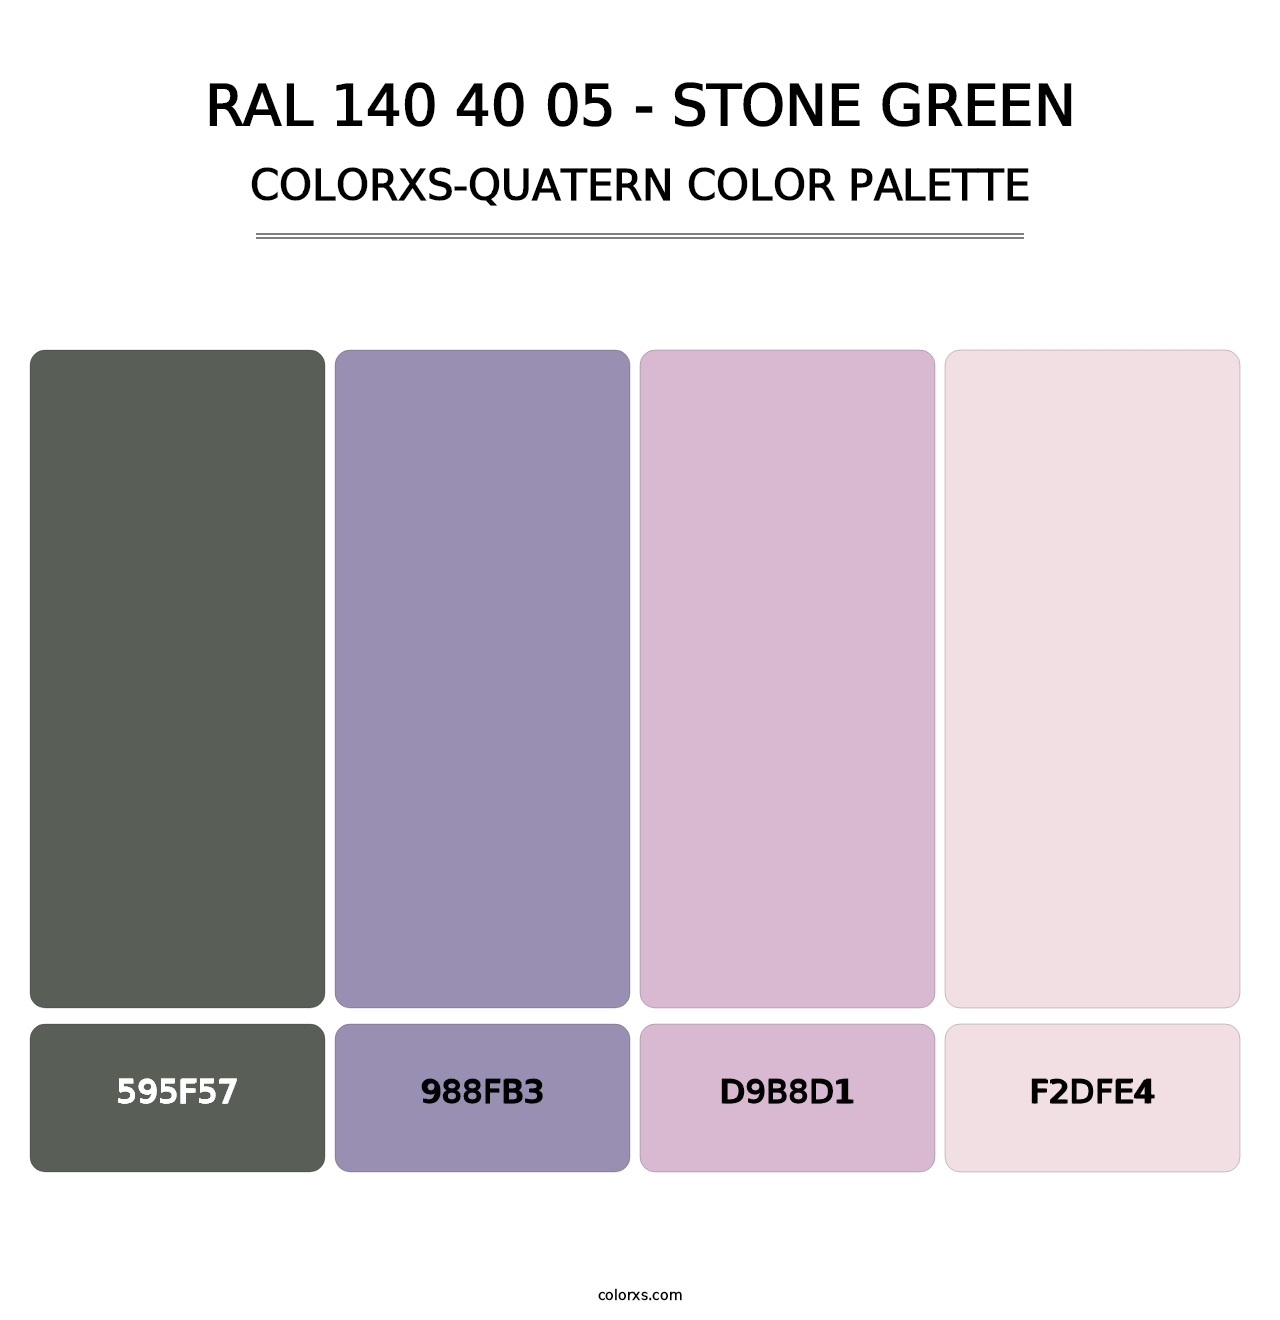 RAL 140 40 05 - Stone Green - Colorxs Quatern Palette